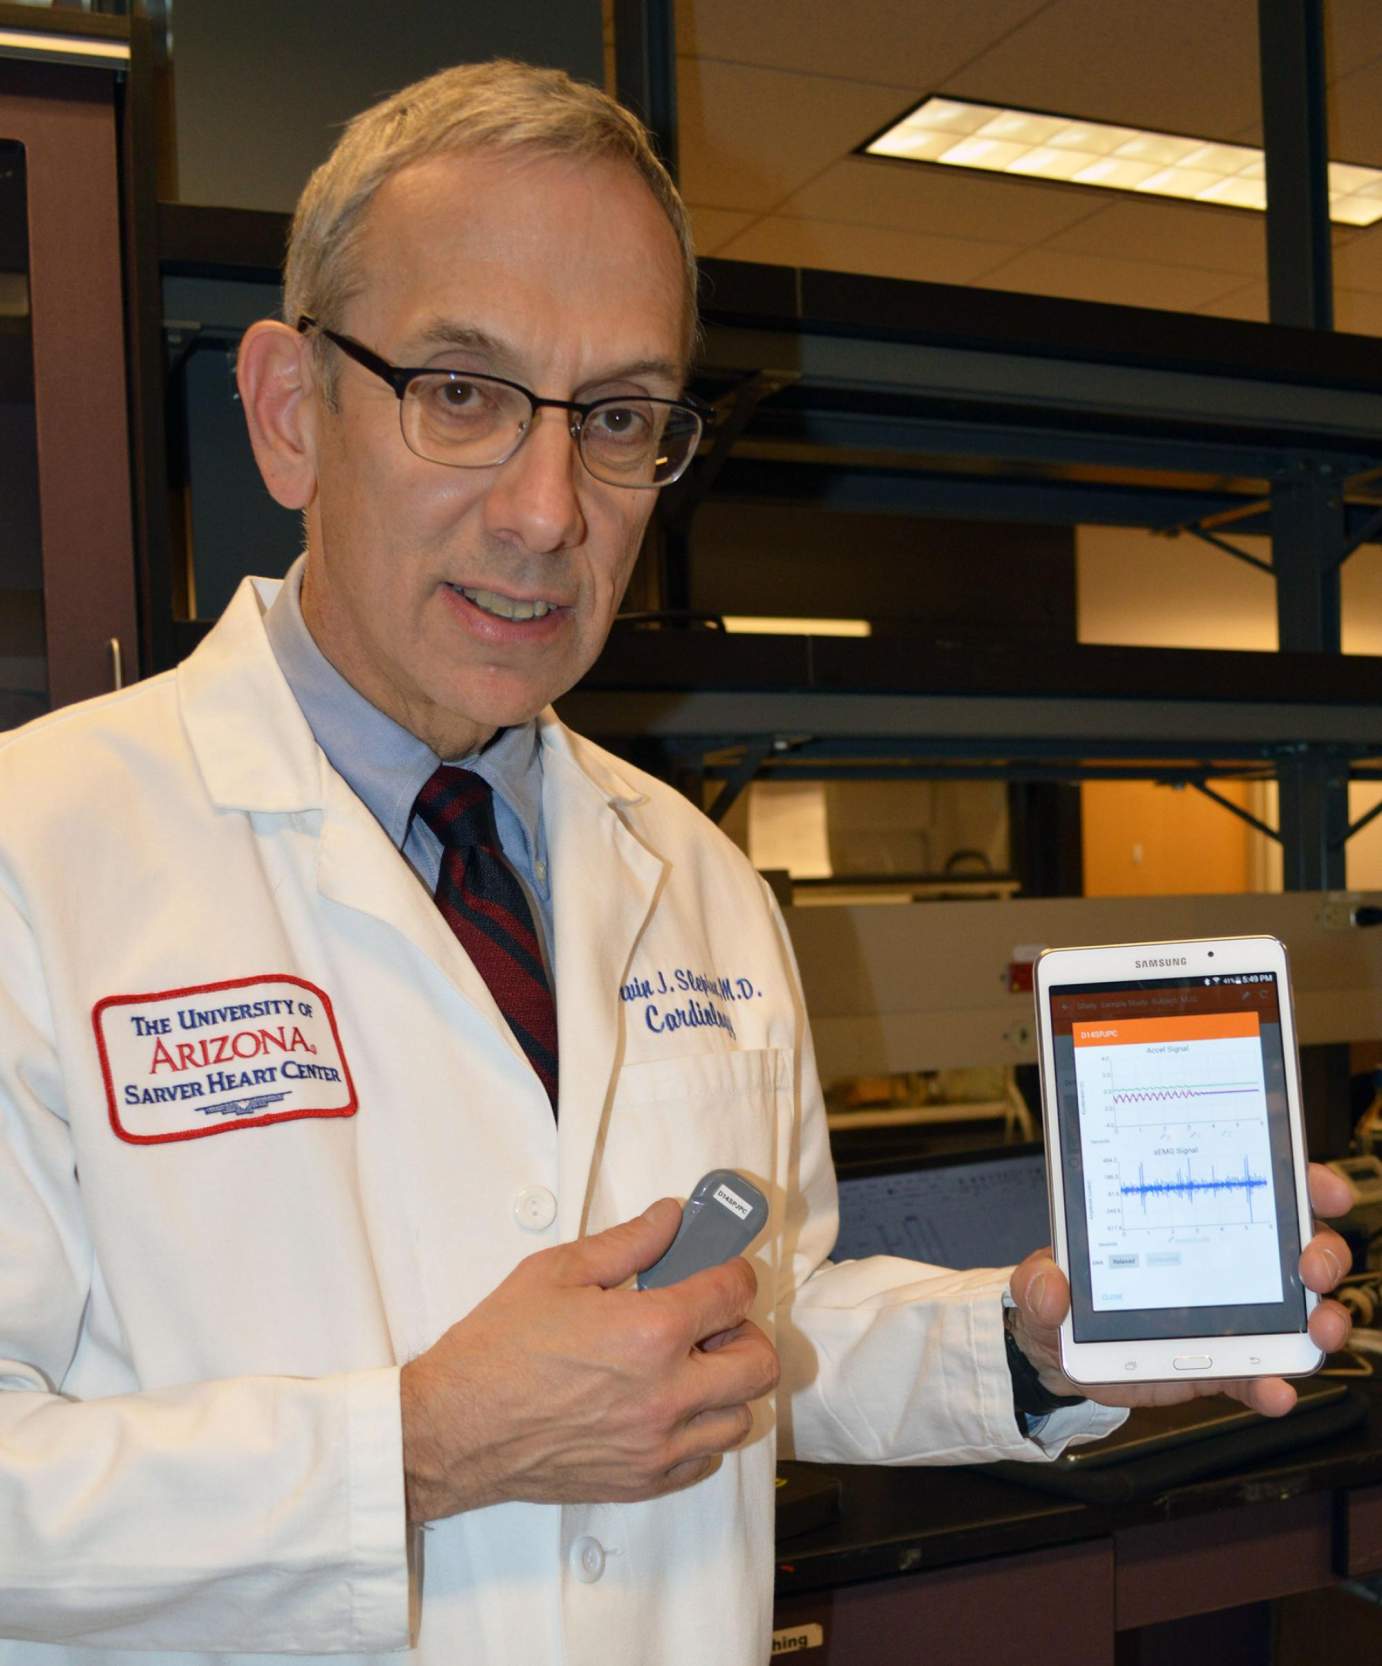 [Marvin J. Slepian, MD, leads a research lab in UA Sarver Heart Center that studies various forms and uses for wearable “patches” that have the ability to measure a range of variables, such as blood pressure.]